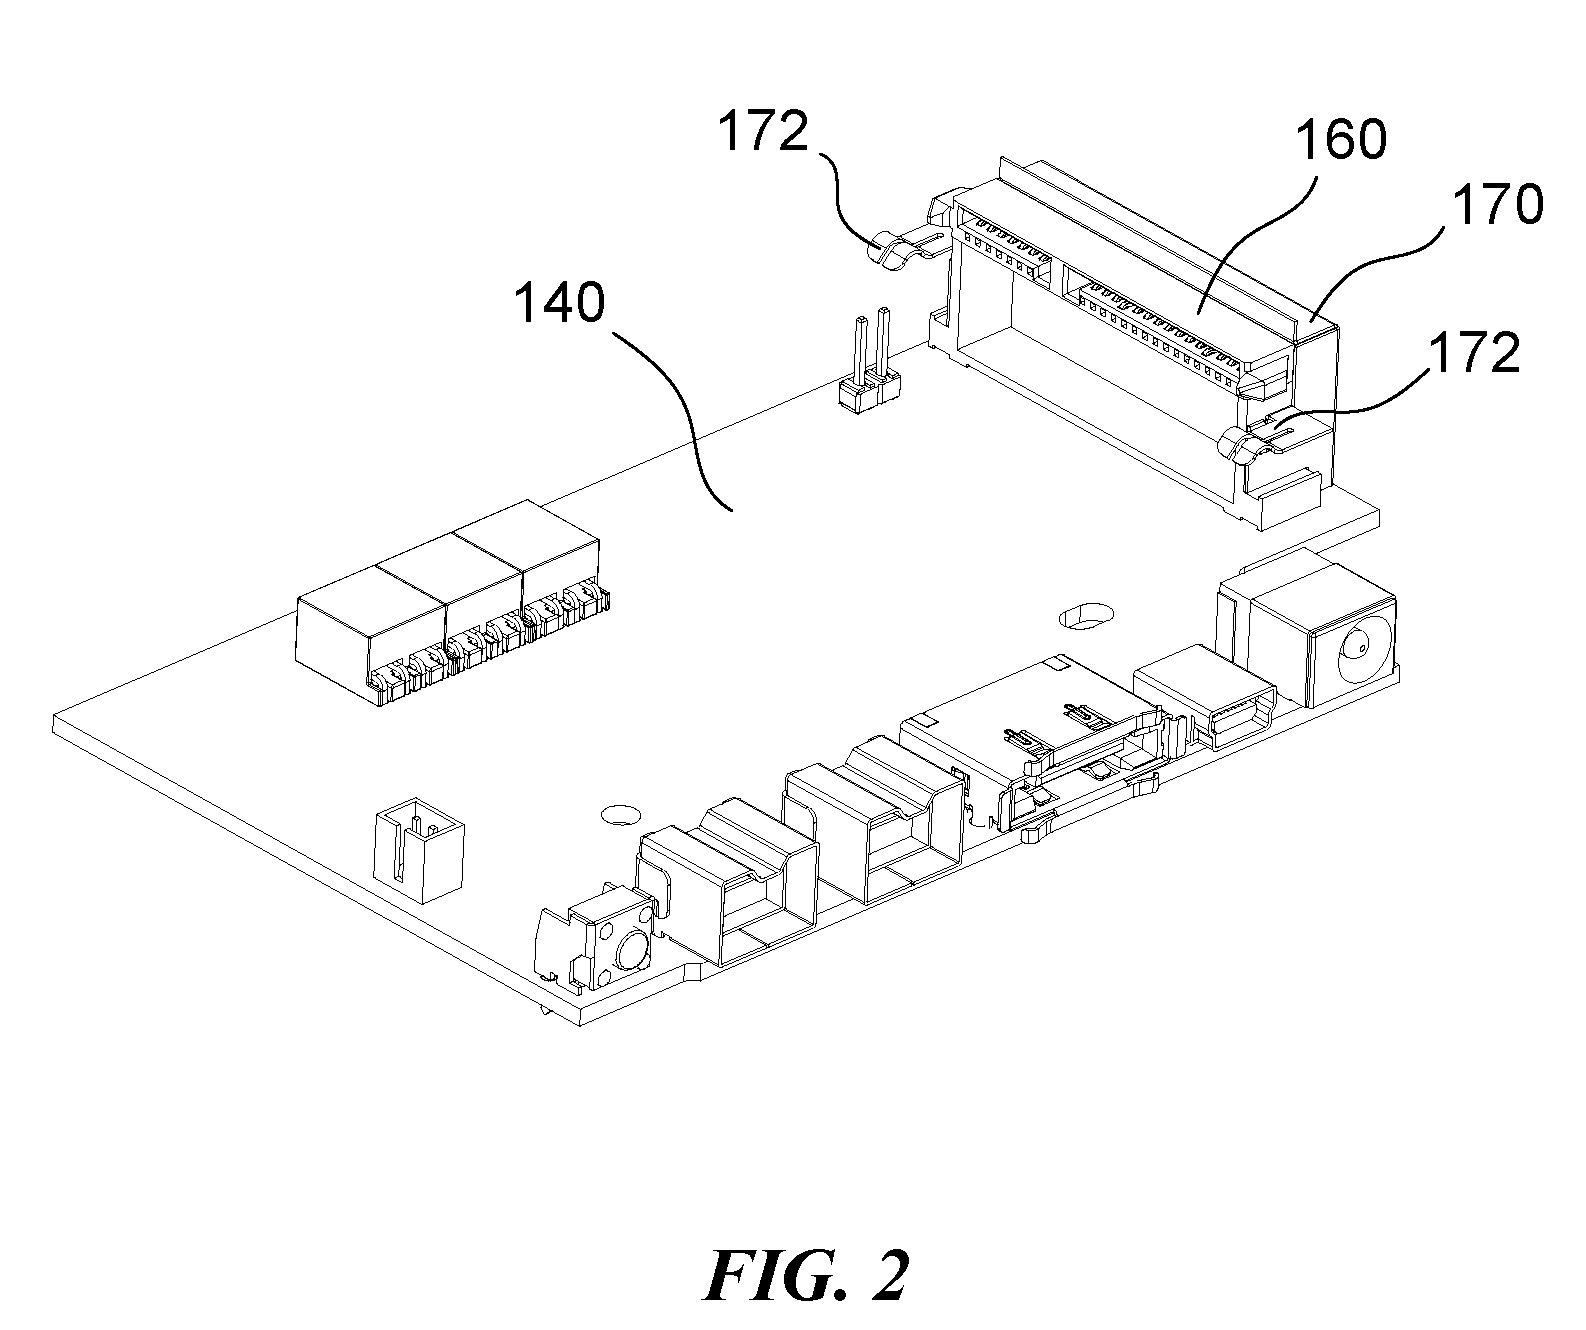 Information storage device with a bridge controller and a plurality of electrically coupled conductive shields